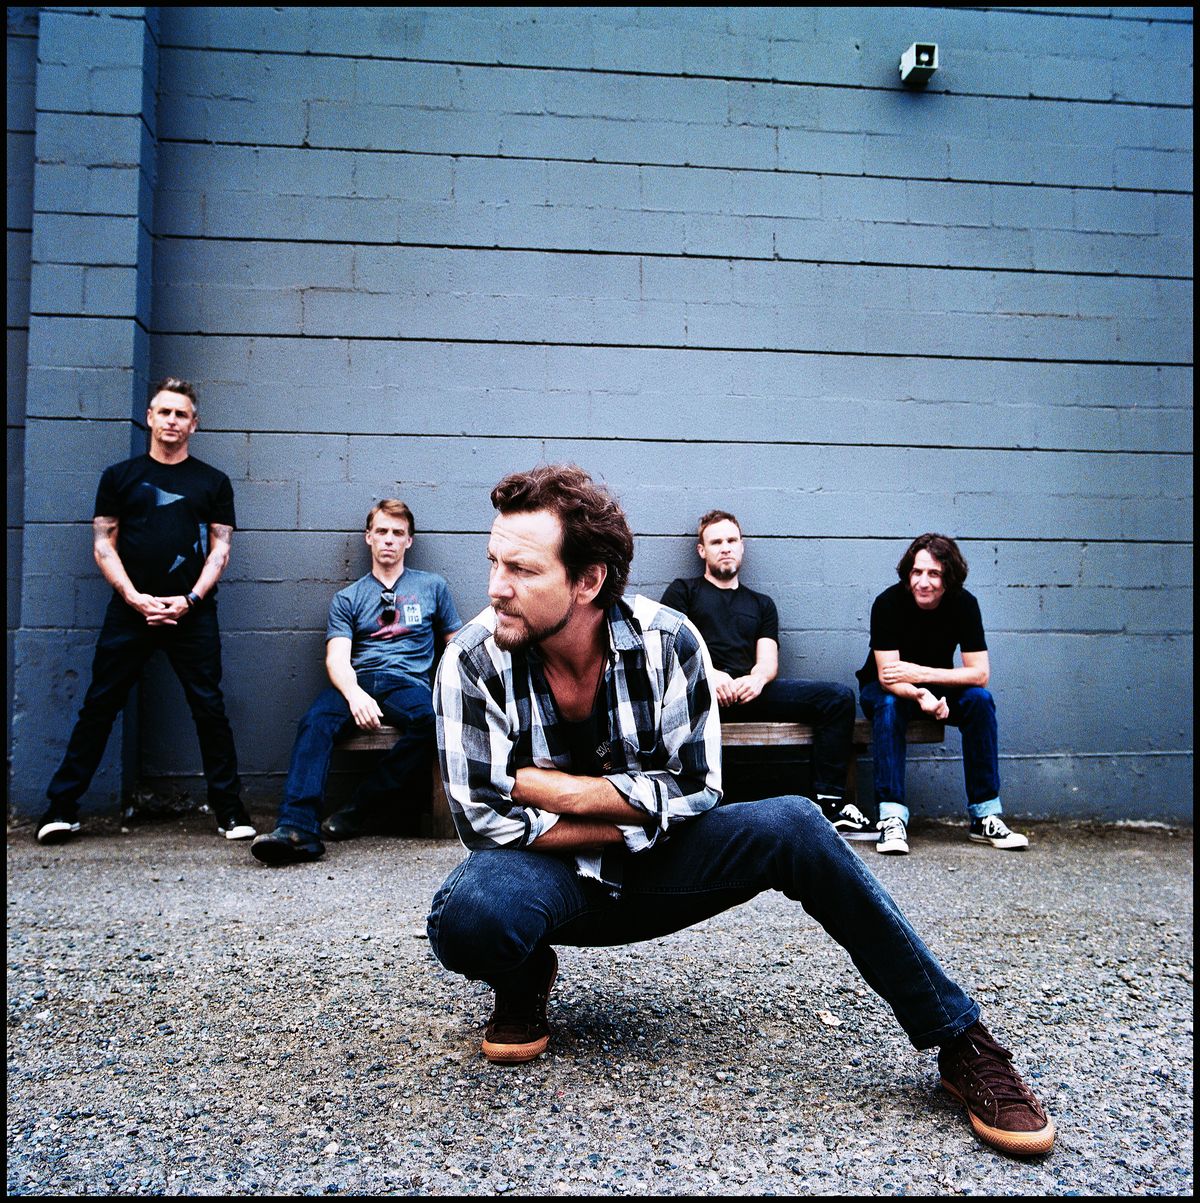 Eddie Vedder is the front man for the rock group Pearl Jam. (Danny Clinch)